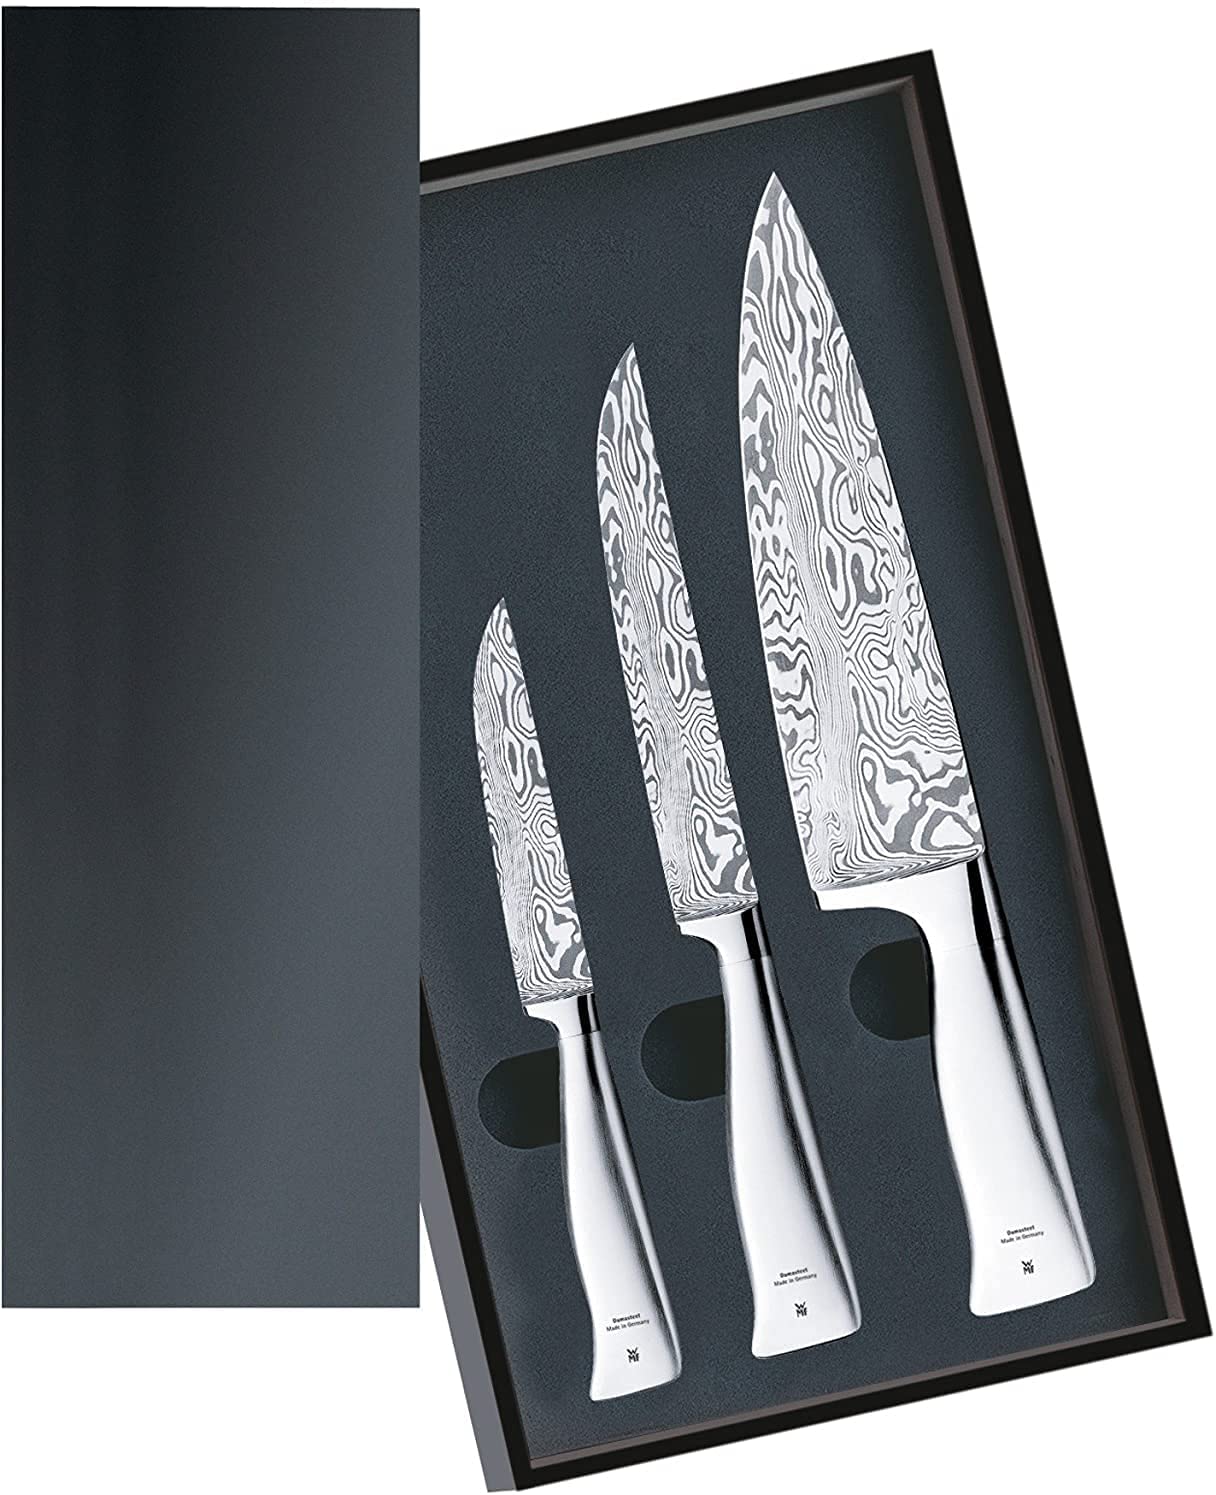 WMF Grand Gourmet Damascus Knife Set of 3 Pieces Damascus Steel 120-Ply Stainless Steel Handle Performance Cut in Wooden Case, Made in Germany